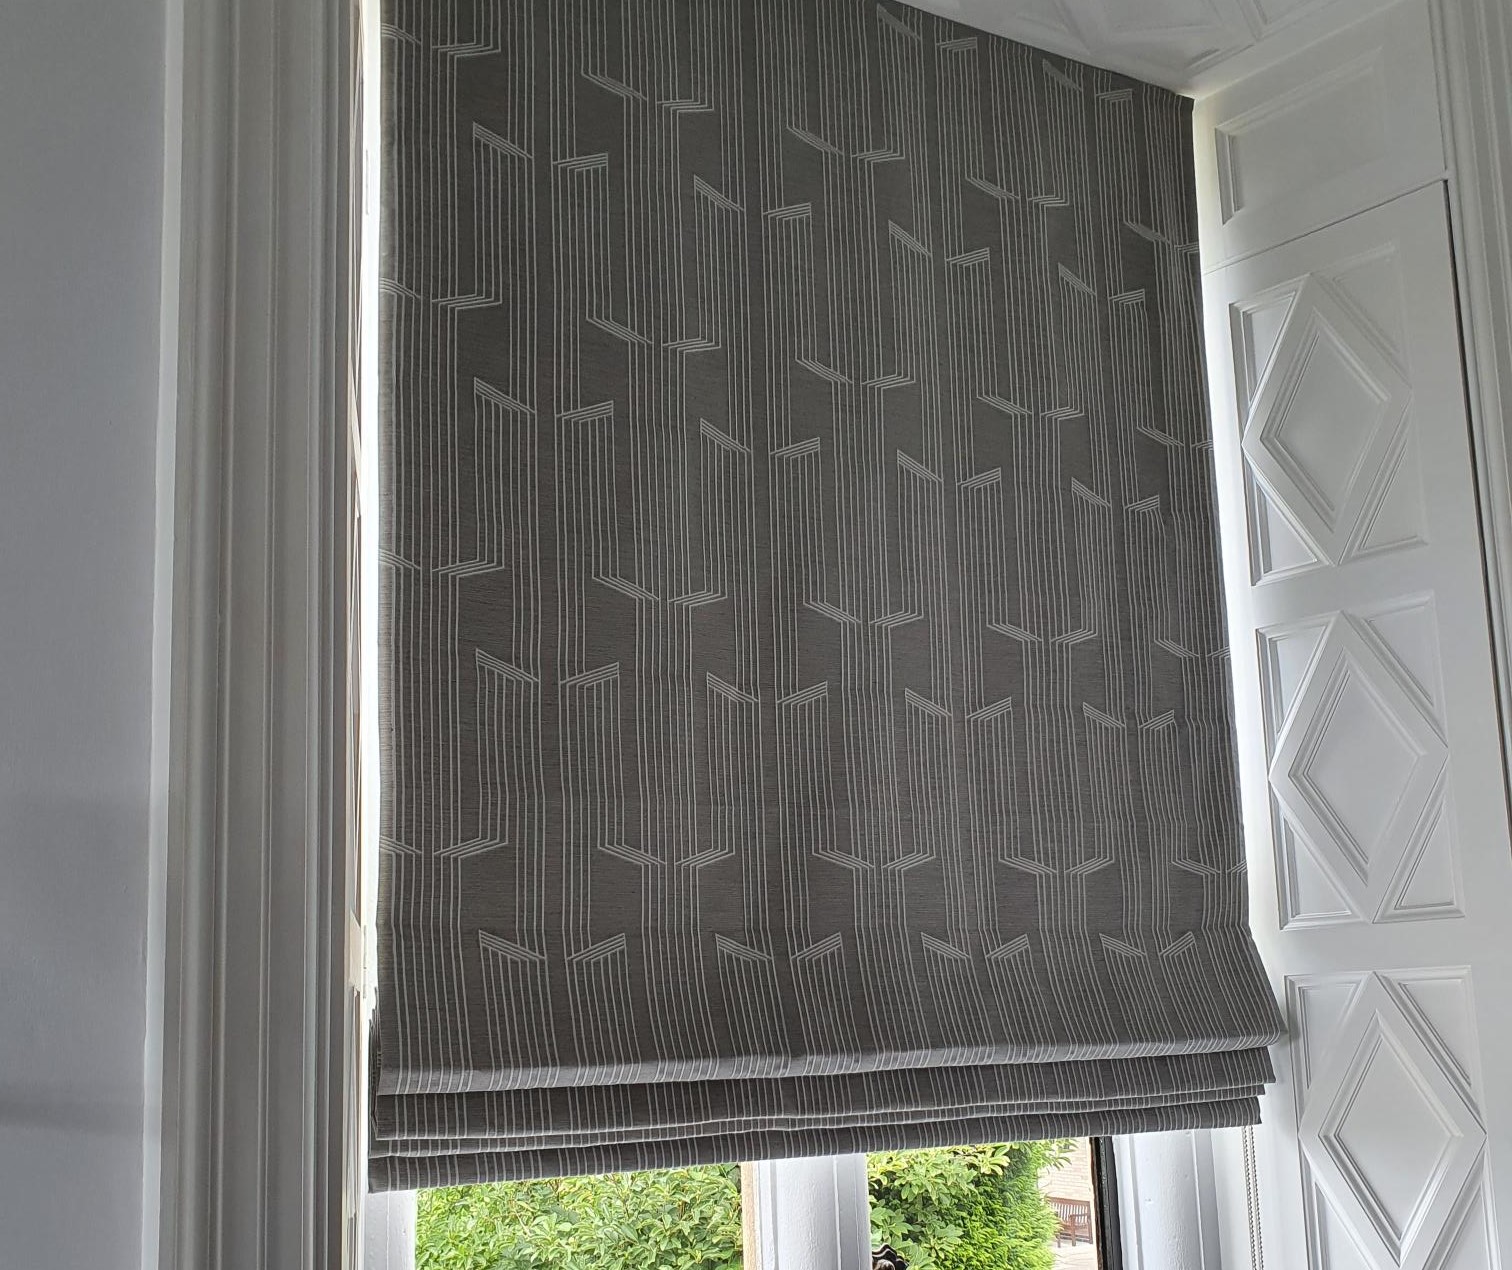 Elegant Oru Roman blind to add layers into the suites.